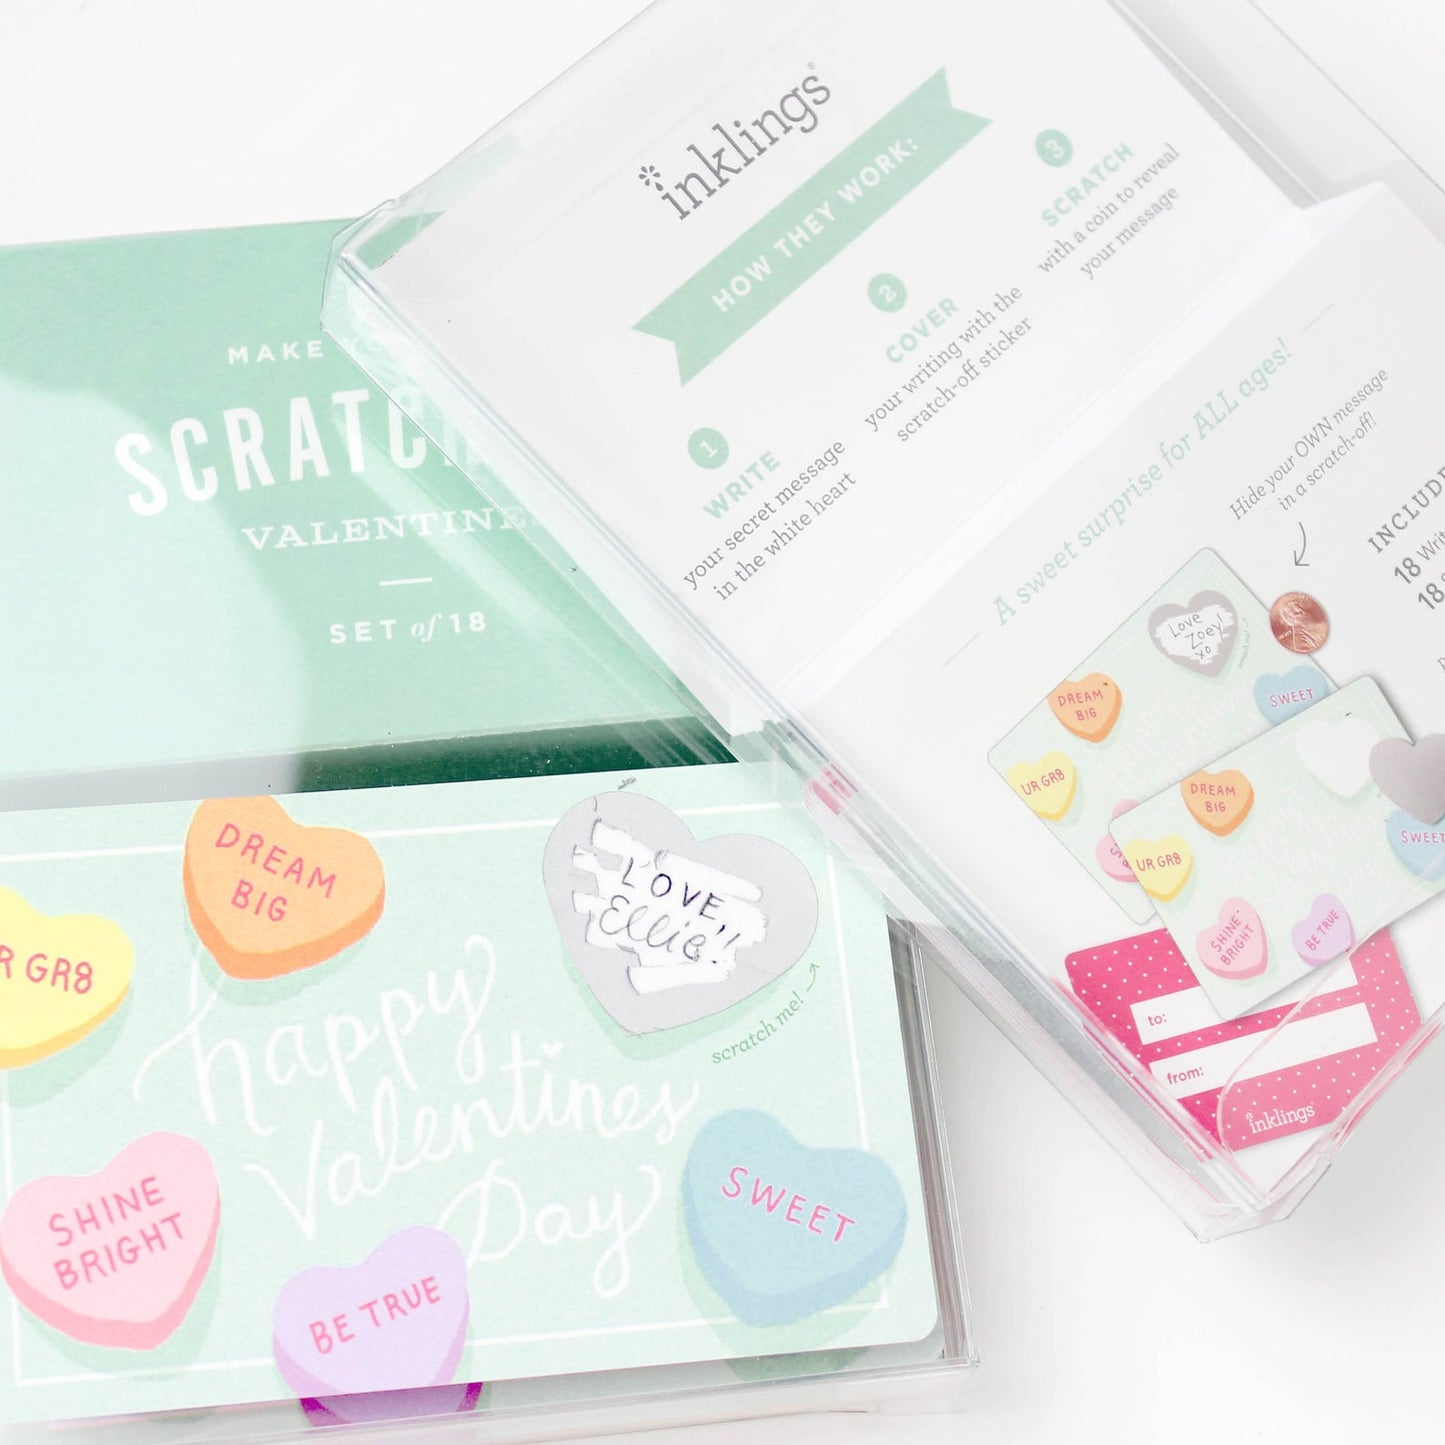 make your own scratch off valentines kit